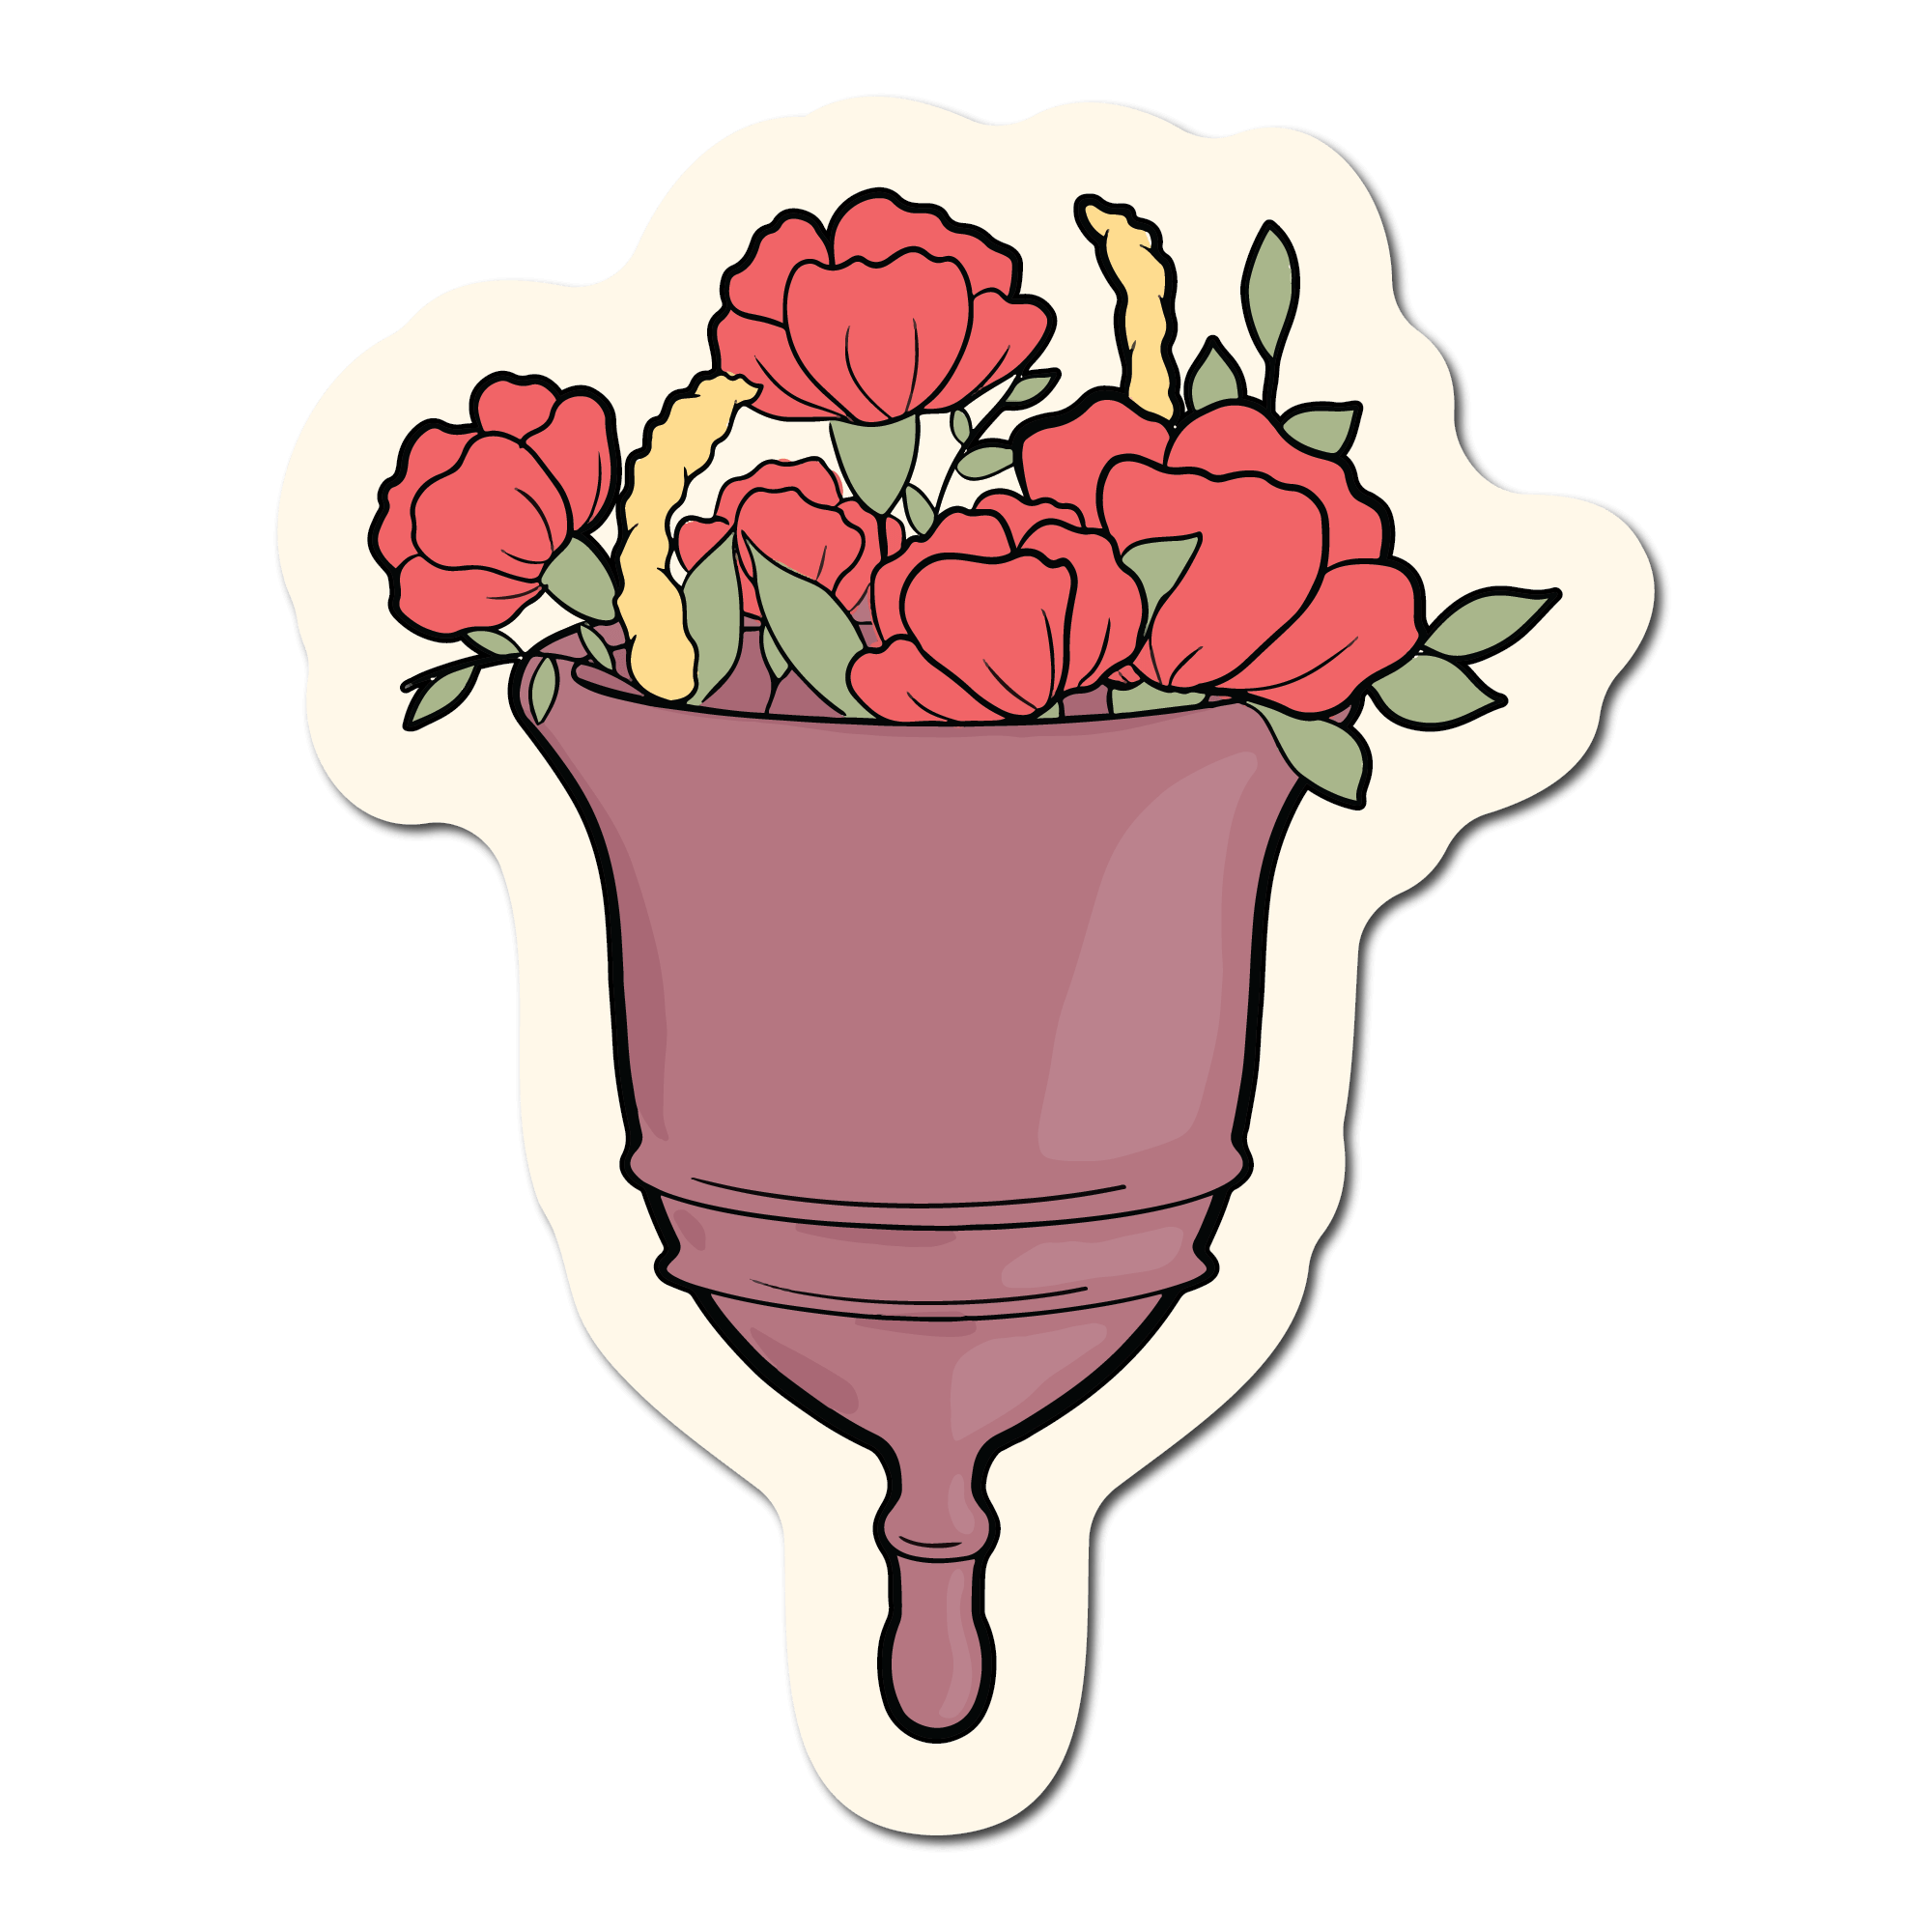 Small Sticker of a purple menstrual cup that has flowers in it